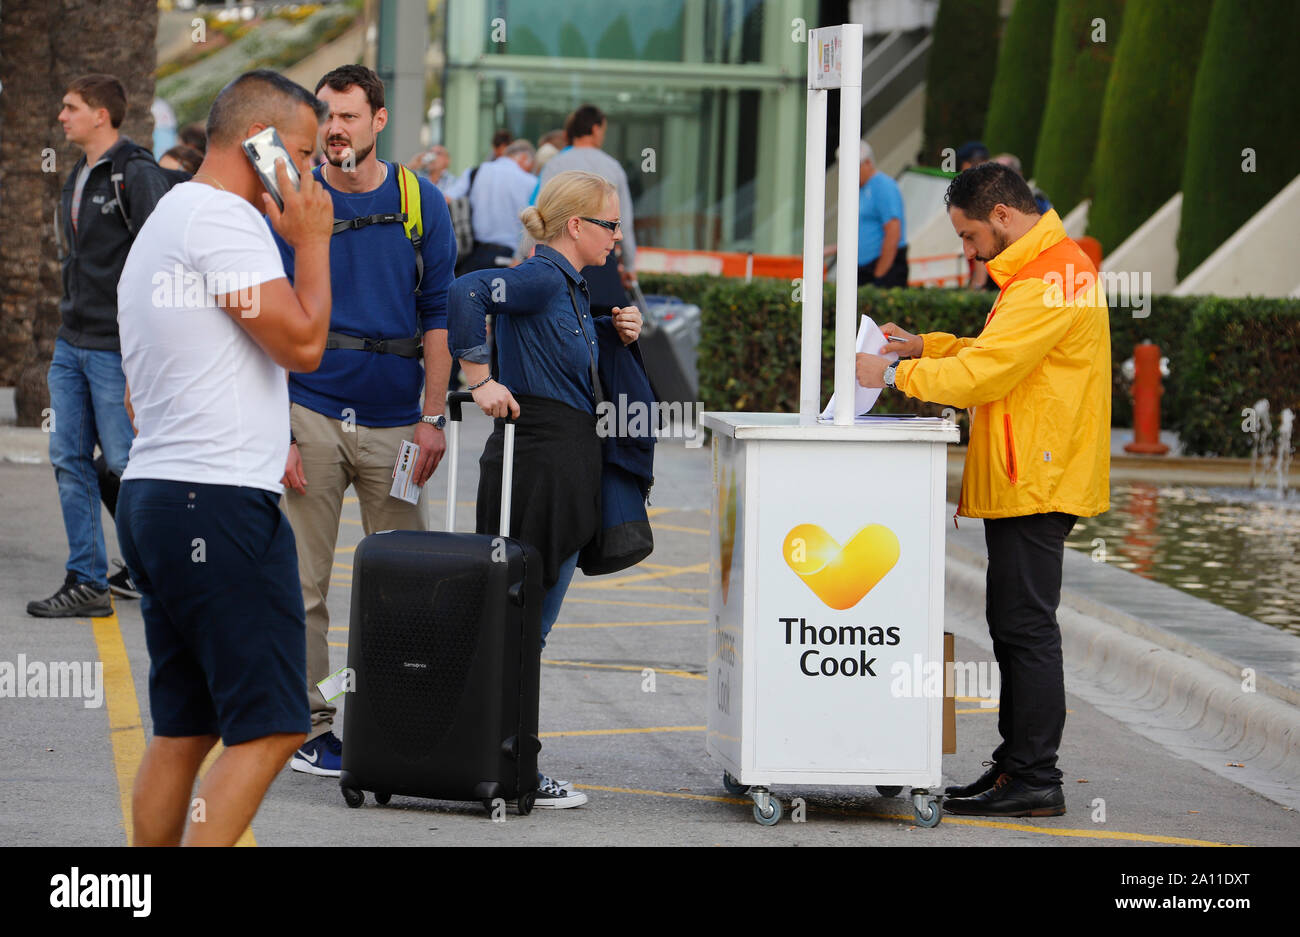 Palma, Spain. 23rd Sep, 2019. Passengers are standing at an information desk at Palma de Mallorca Airport on the day of Thomas Cook's failure. The efforts to rescue the battered British tourism group Thomas Cook have failed. The second largest travel company in Europe announced that a corresponding insolvency petition had already been filed in court. Credit: Clara Margais/dpa/Alamy Live News Stock Photo